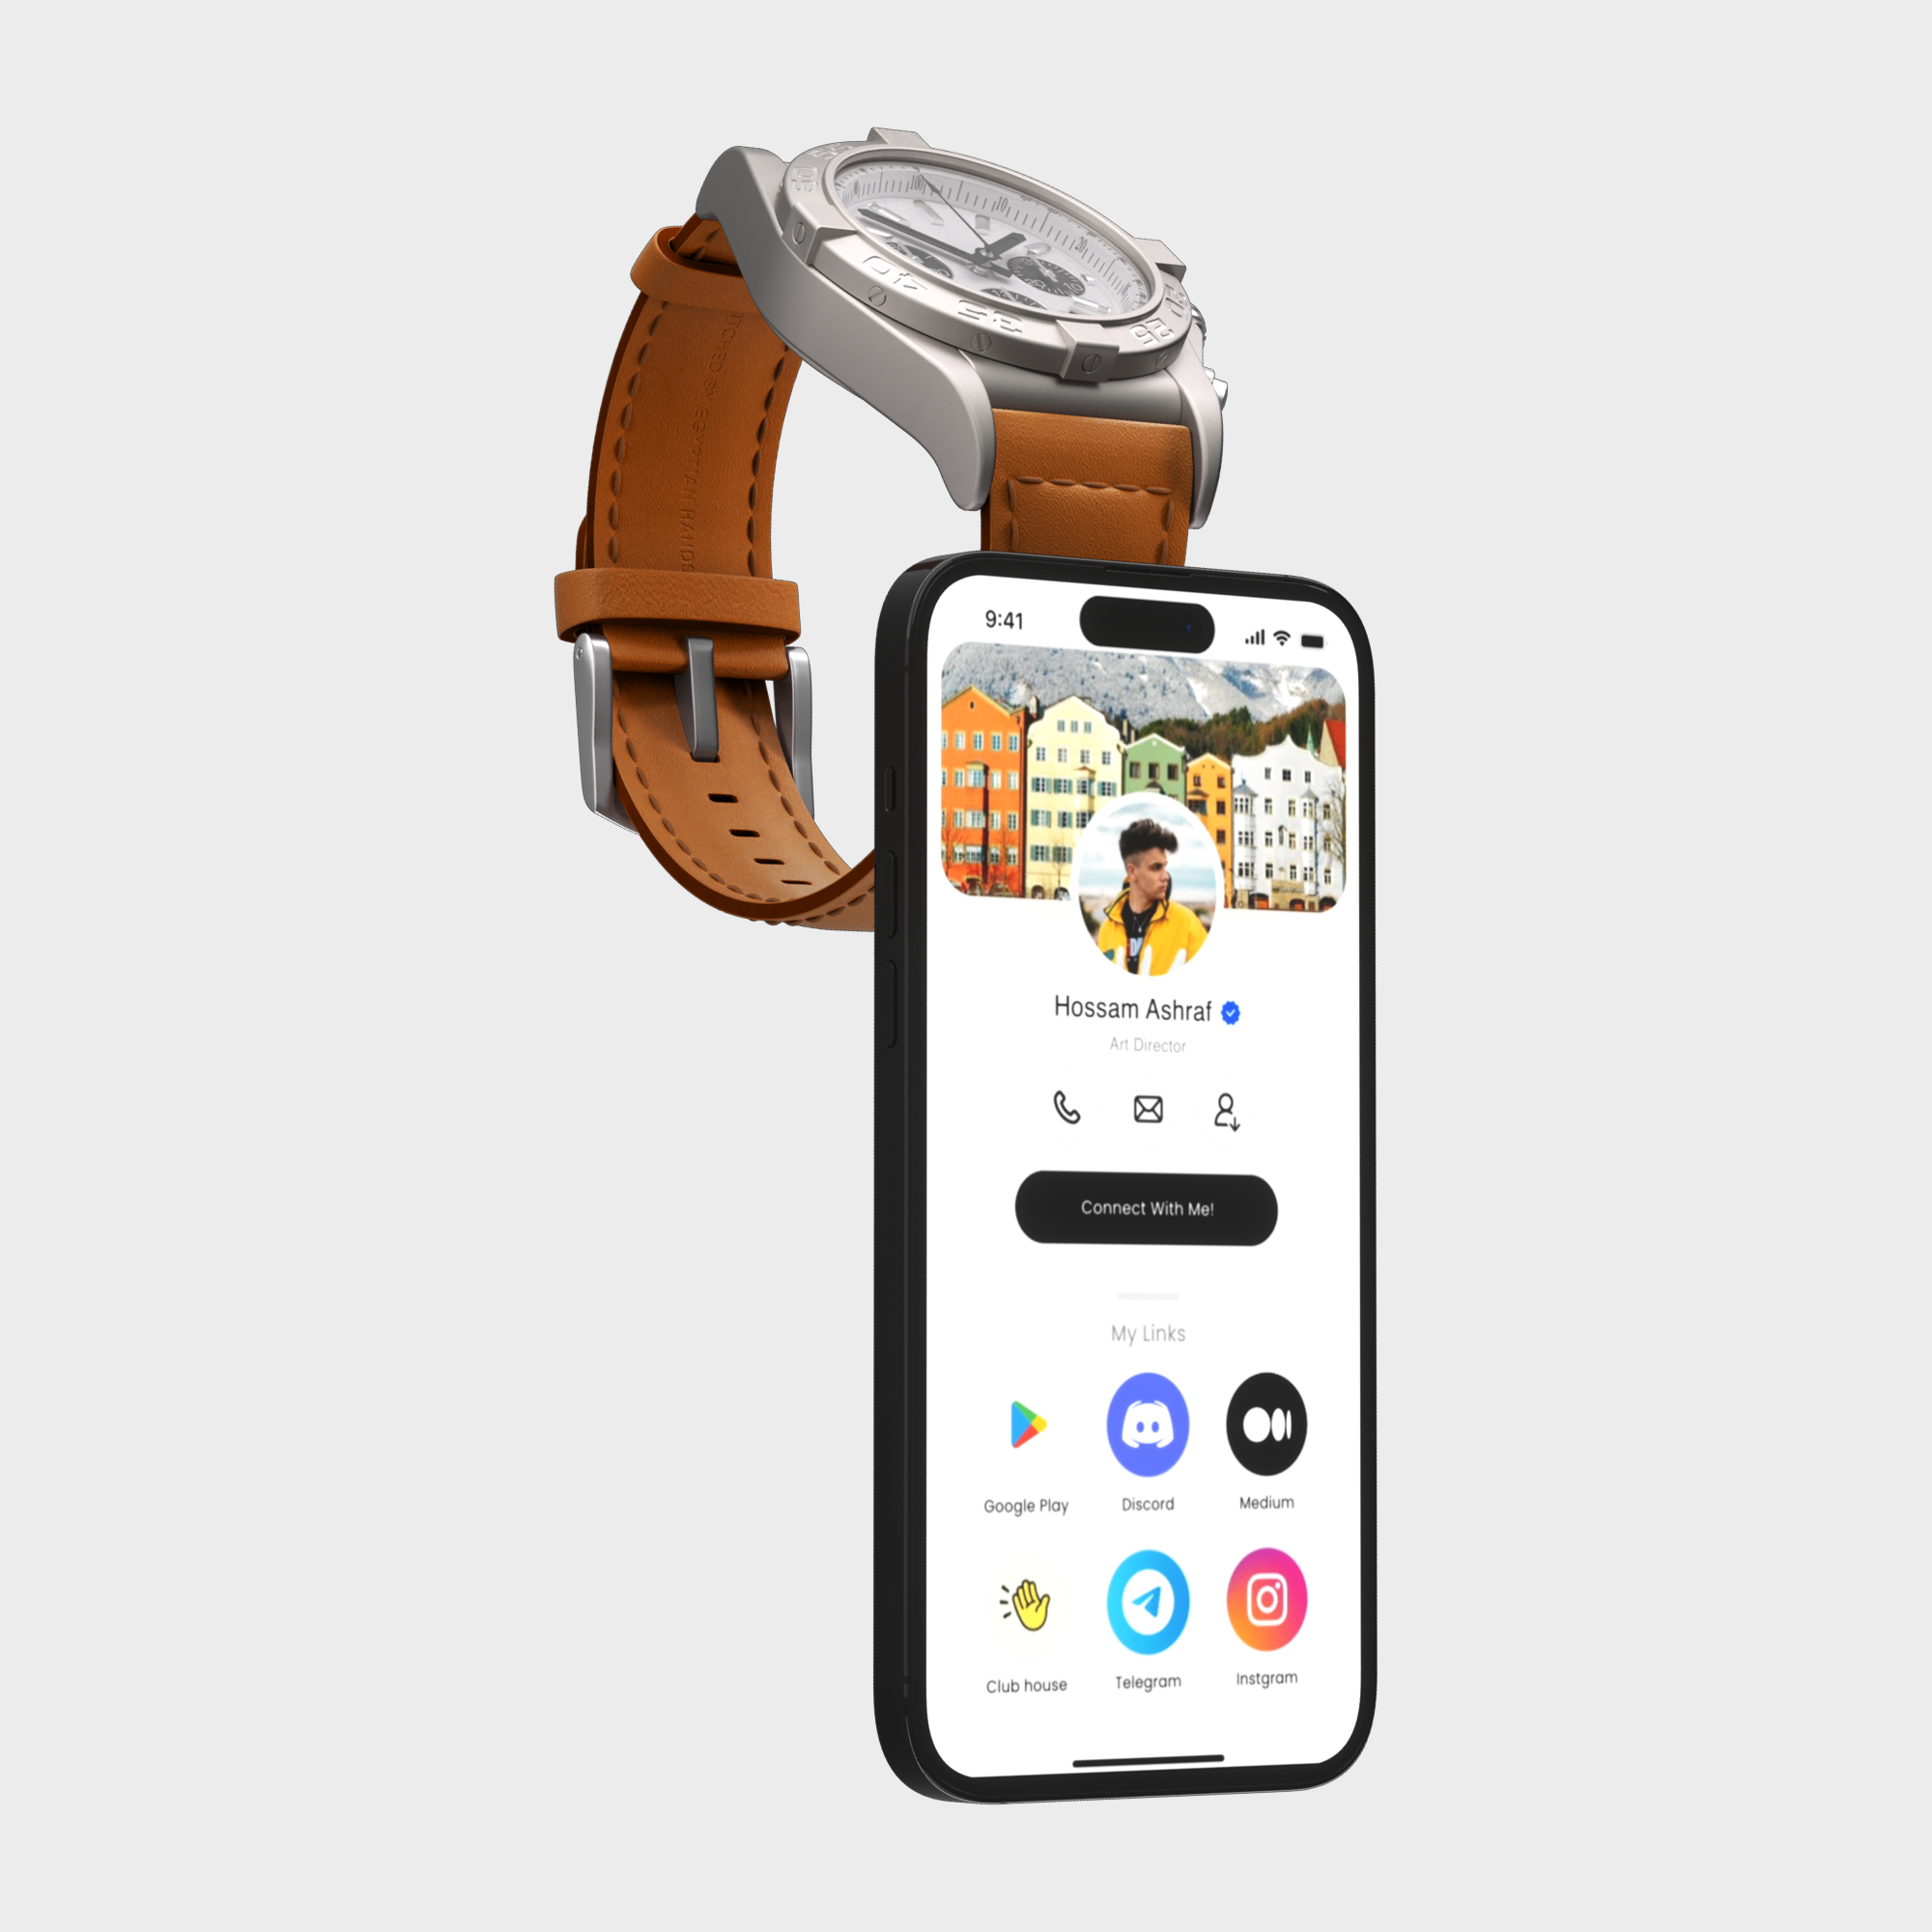 Luxury wristwatch beside a smartphone displaying a social profile and apps.